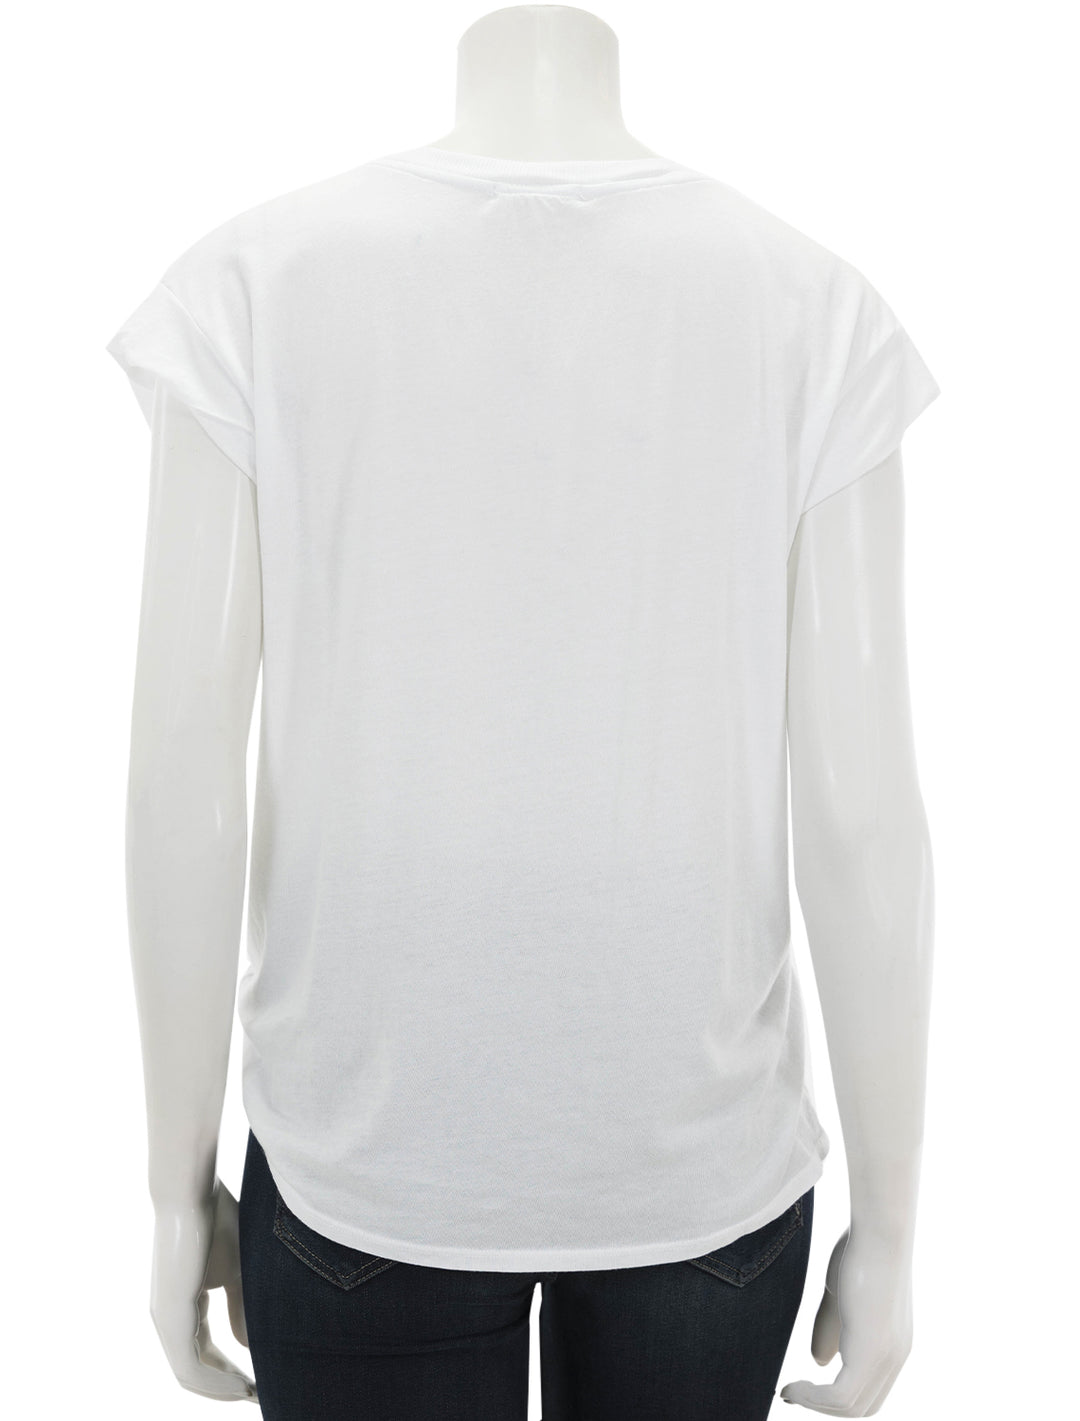 Back view of Sundry's muscle tee with side slit in white.